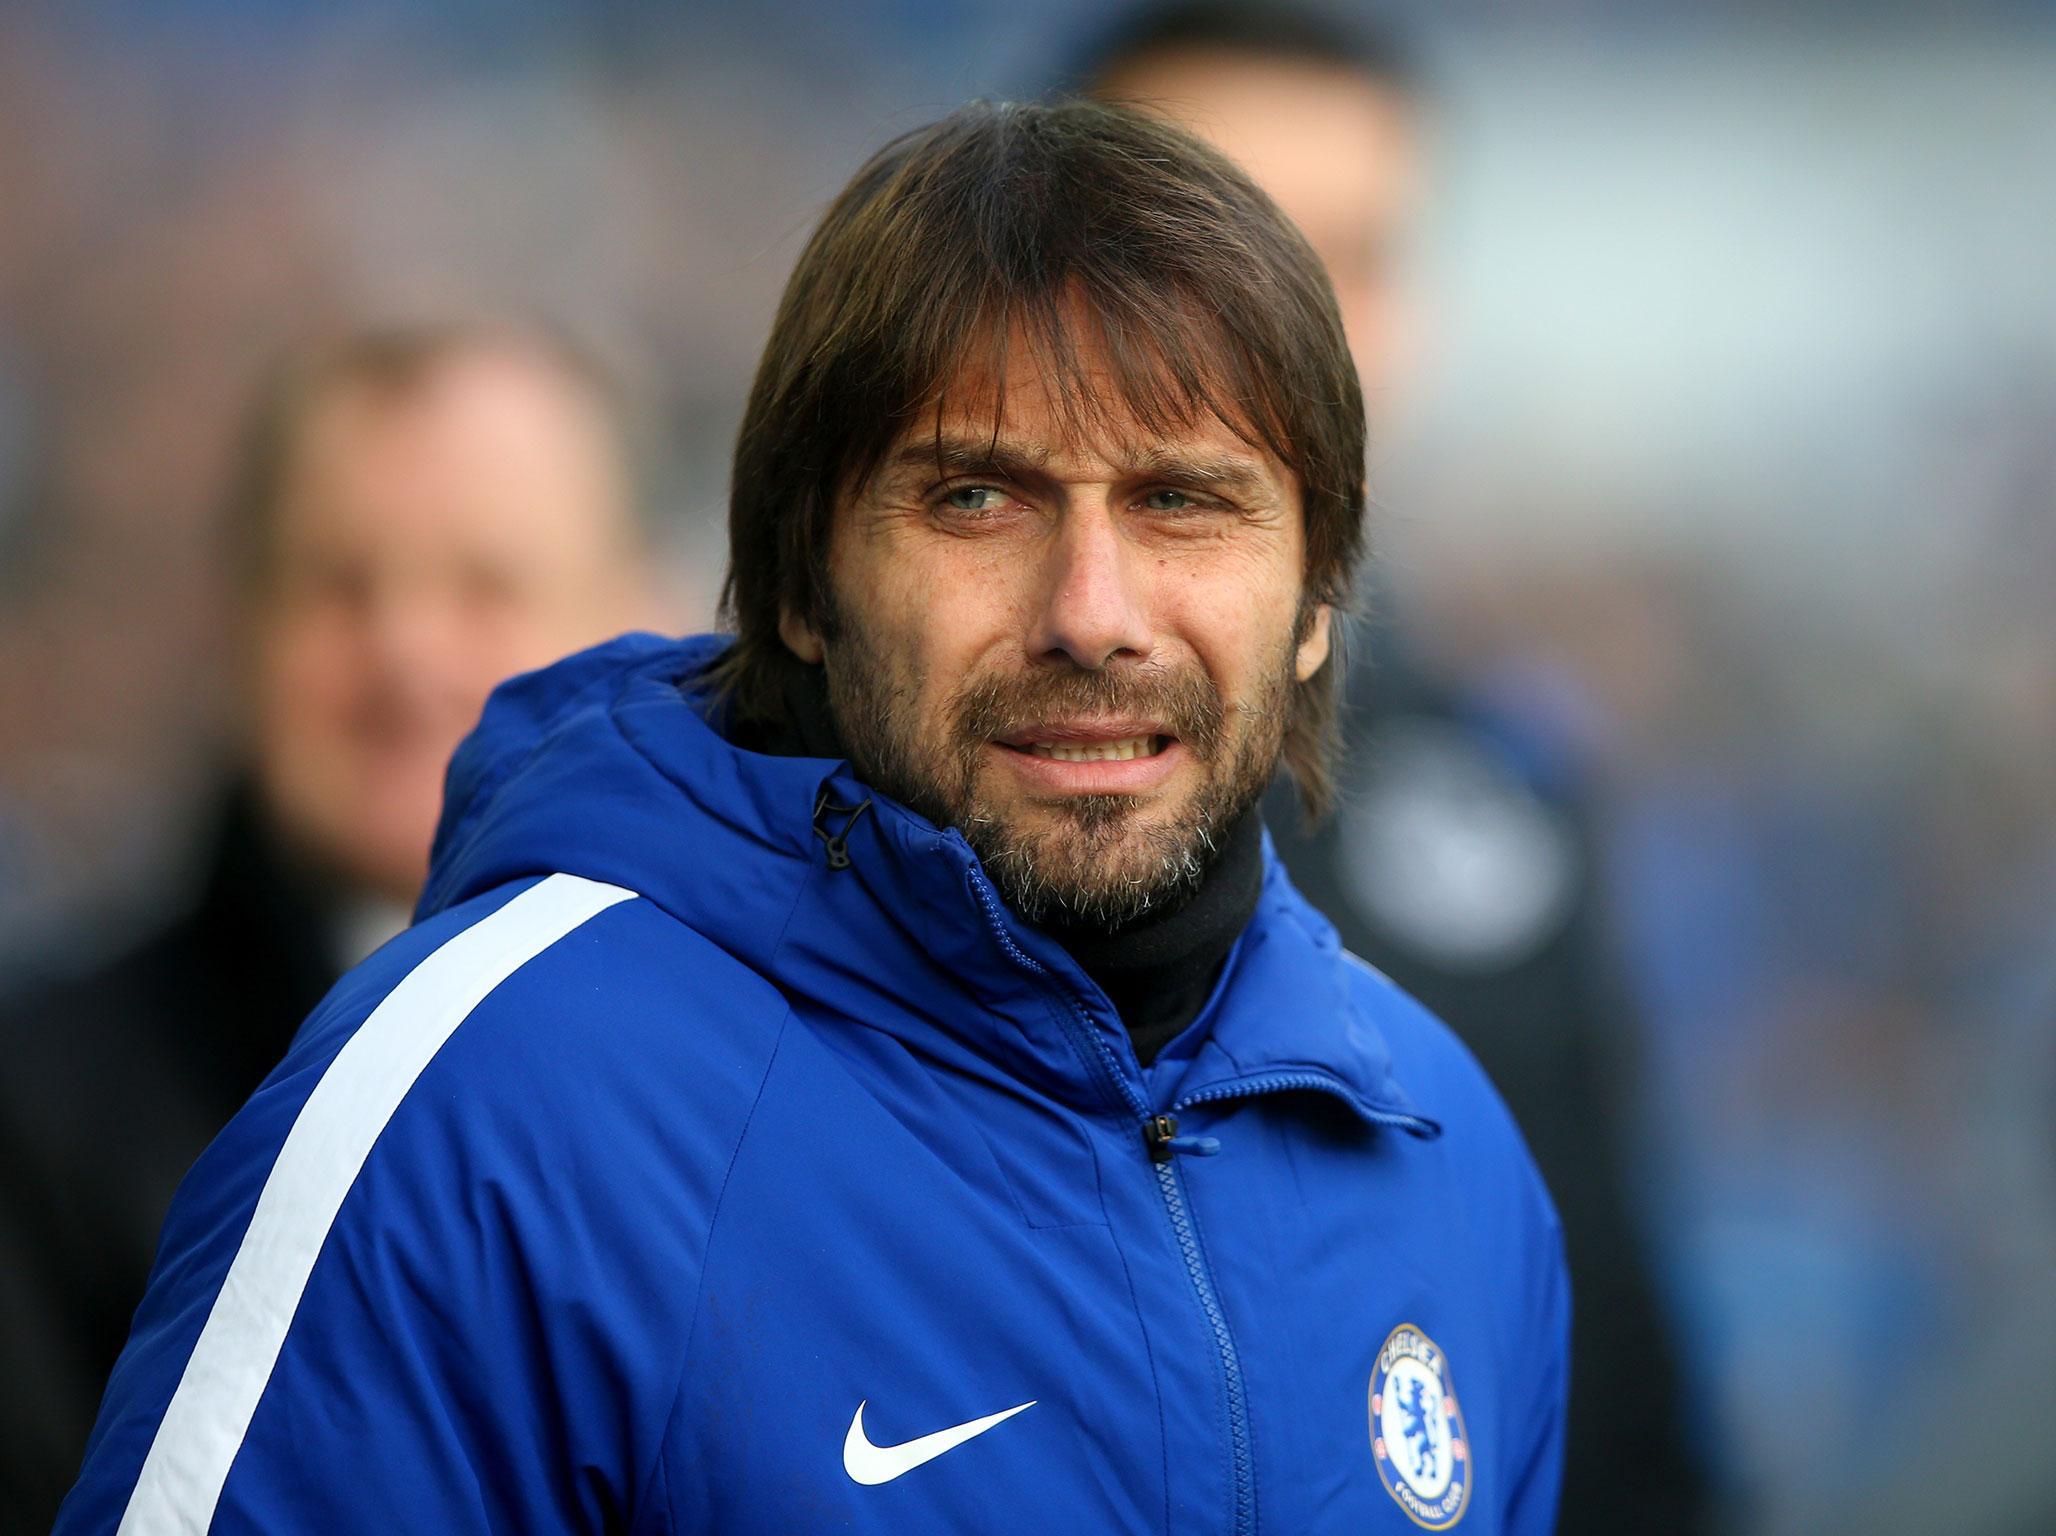 Antonio Conte is laying low beneath the flying barbs and criticism hoping the Chelsea hierarchy will deliver in January